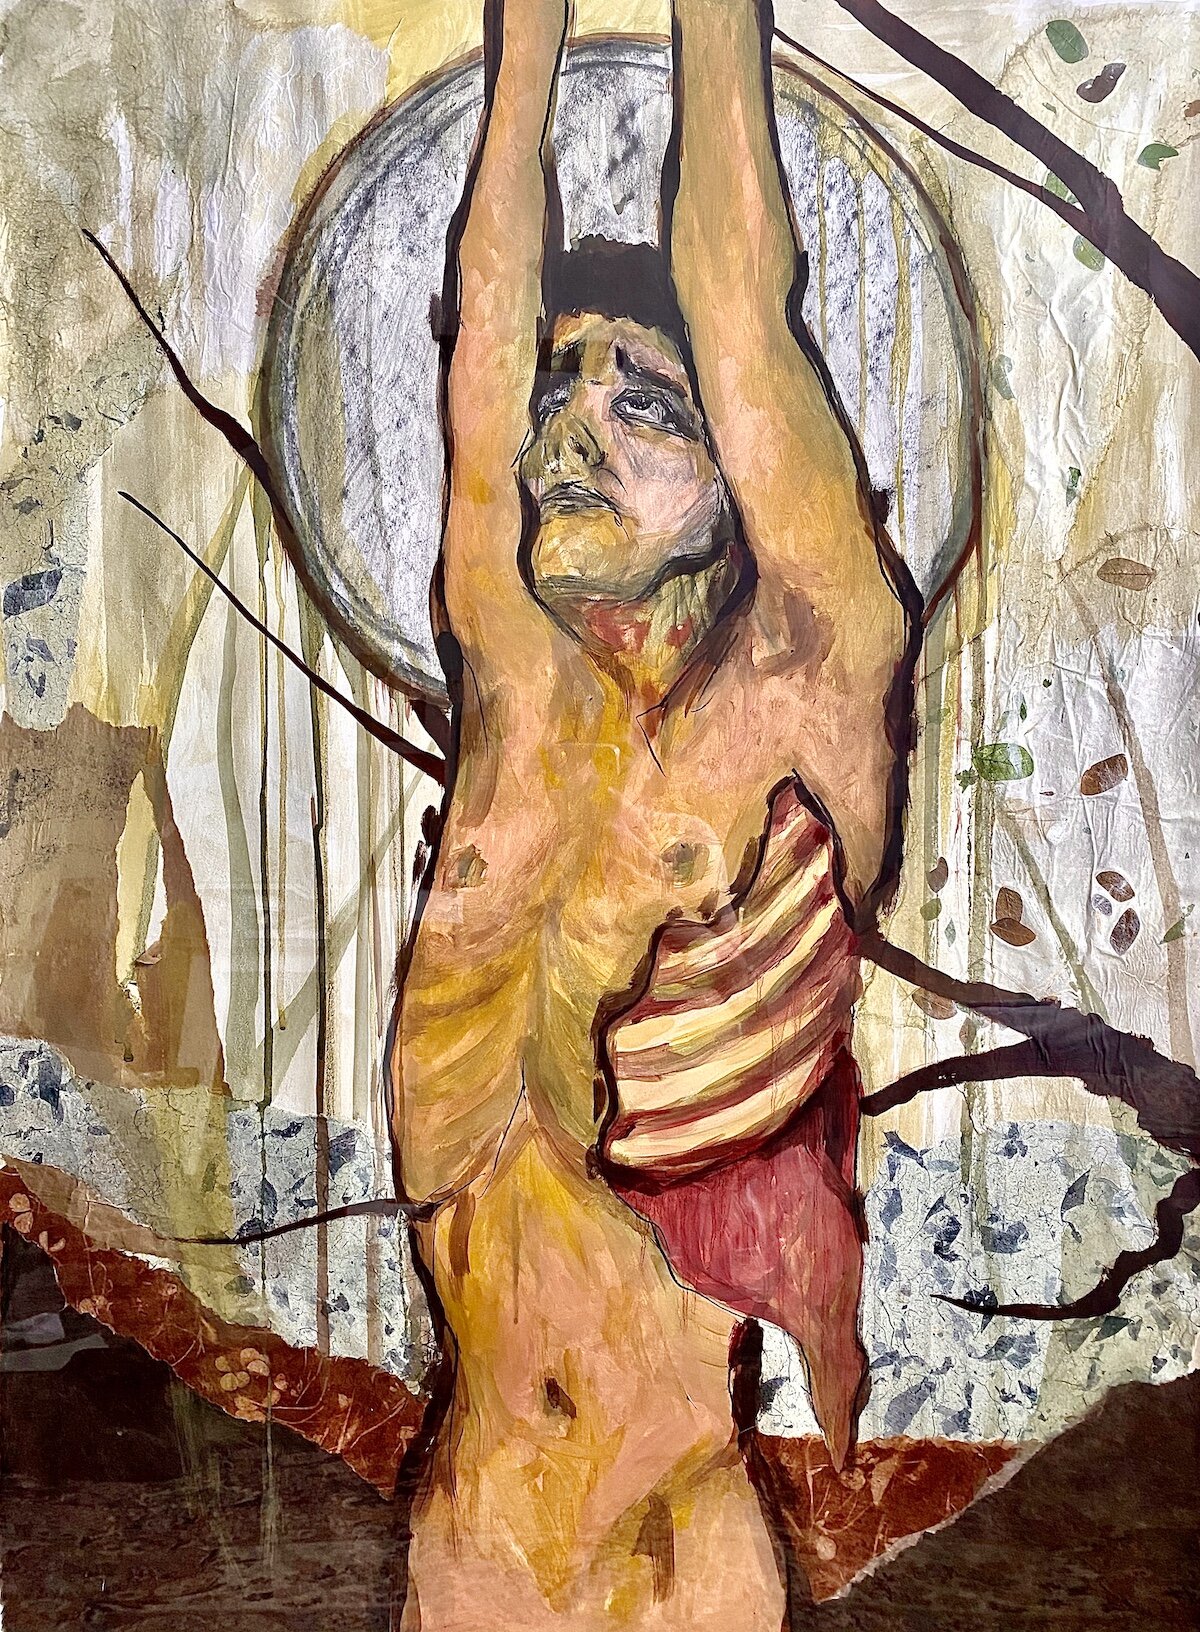    Saint Bartholomew  , oil, charcoal, found paper, watercolor - on paper, 40” x 30” 